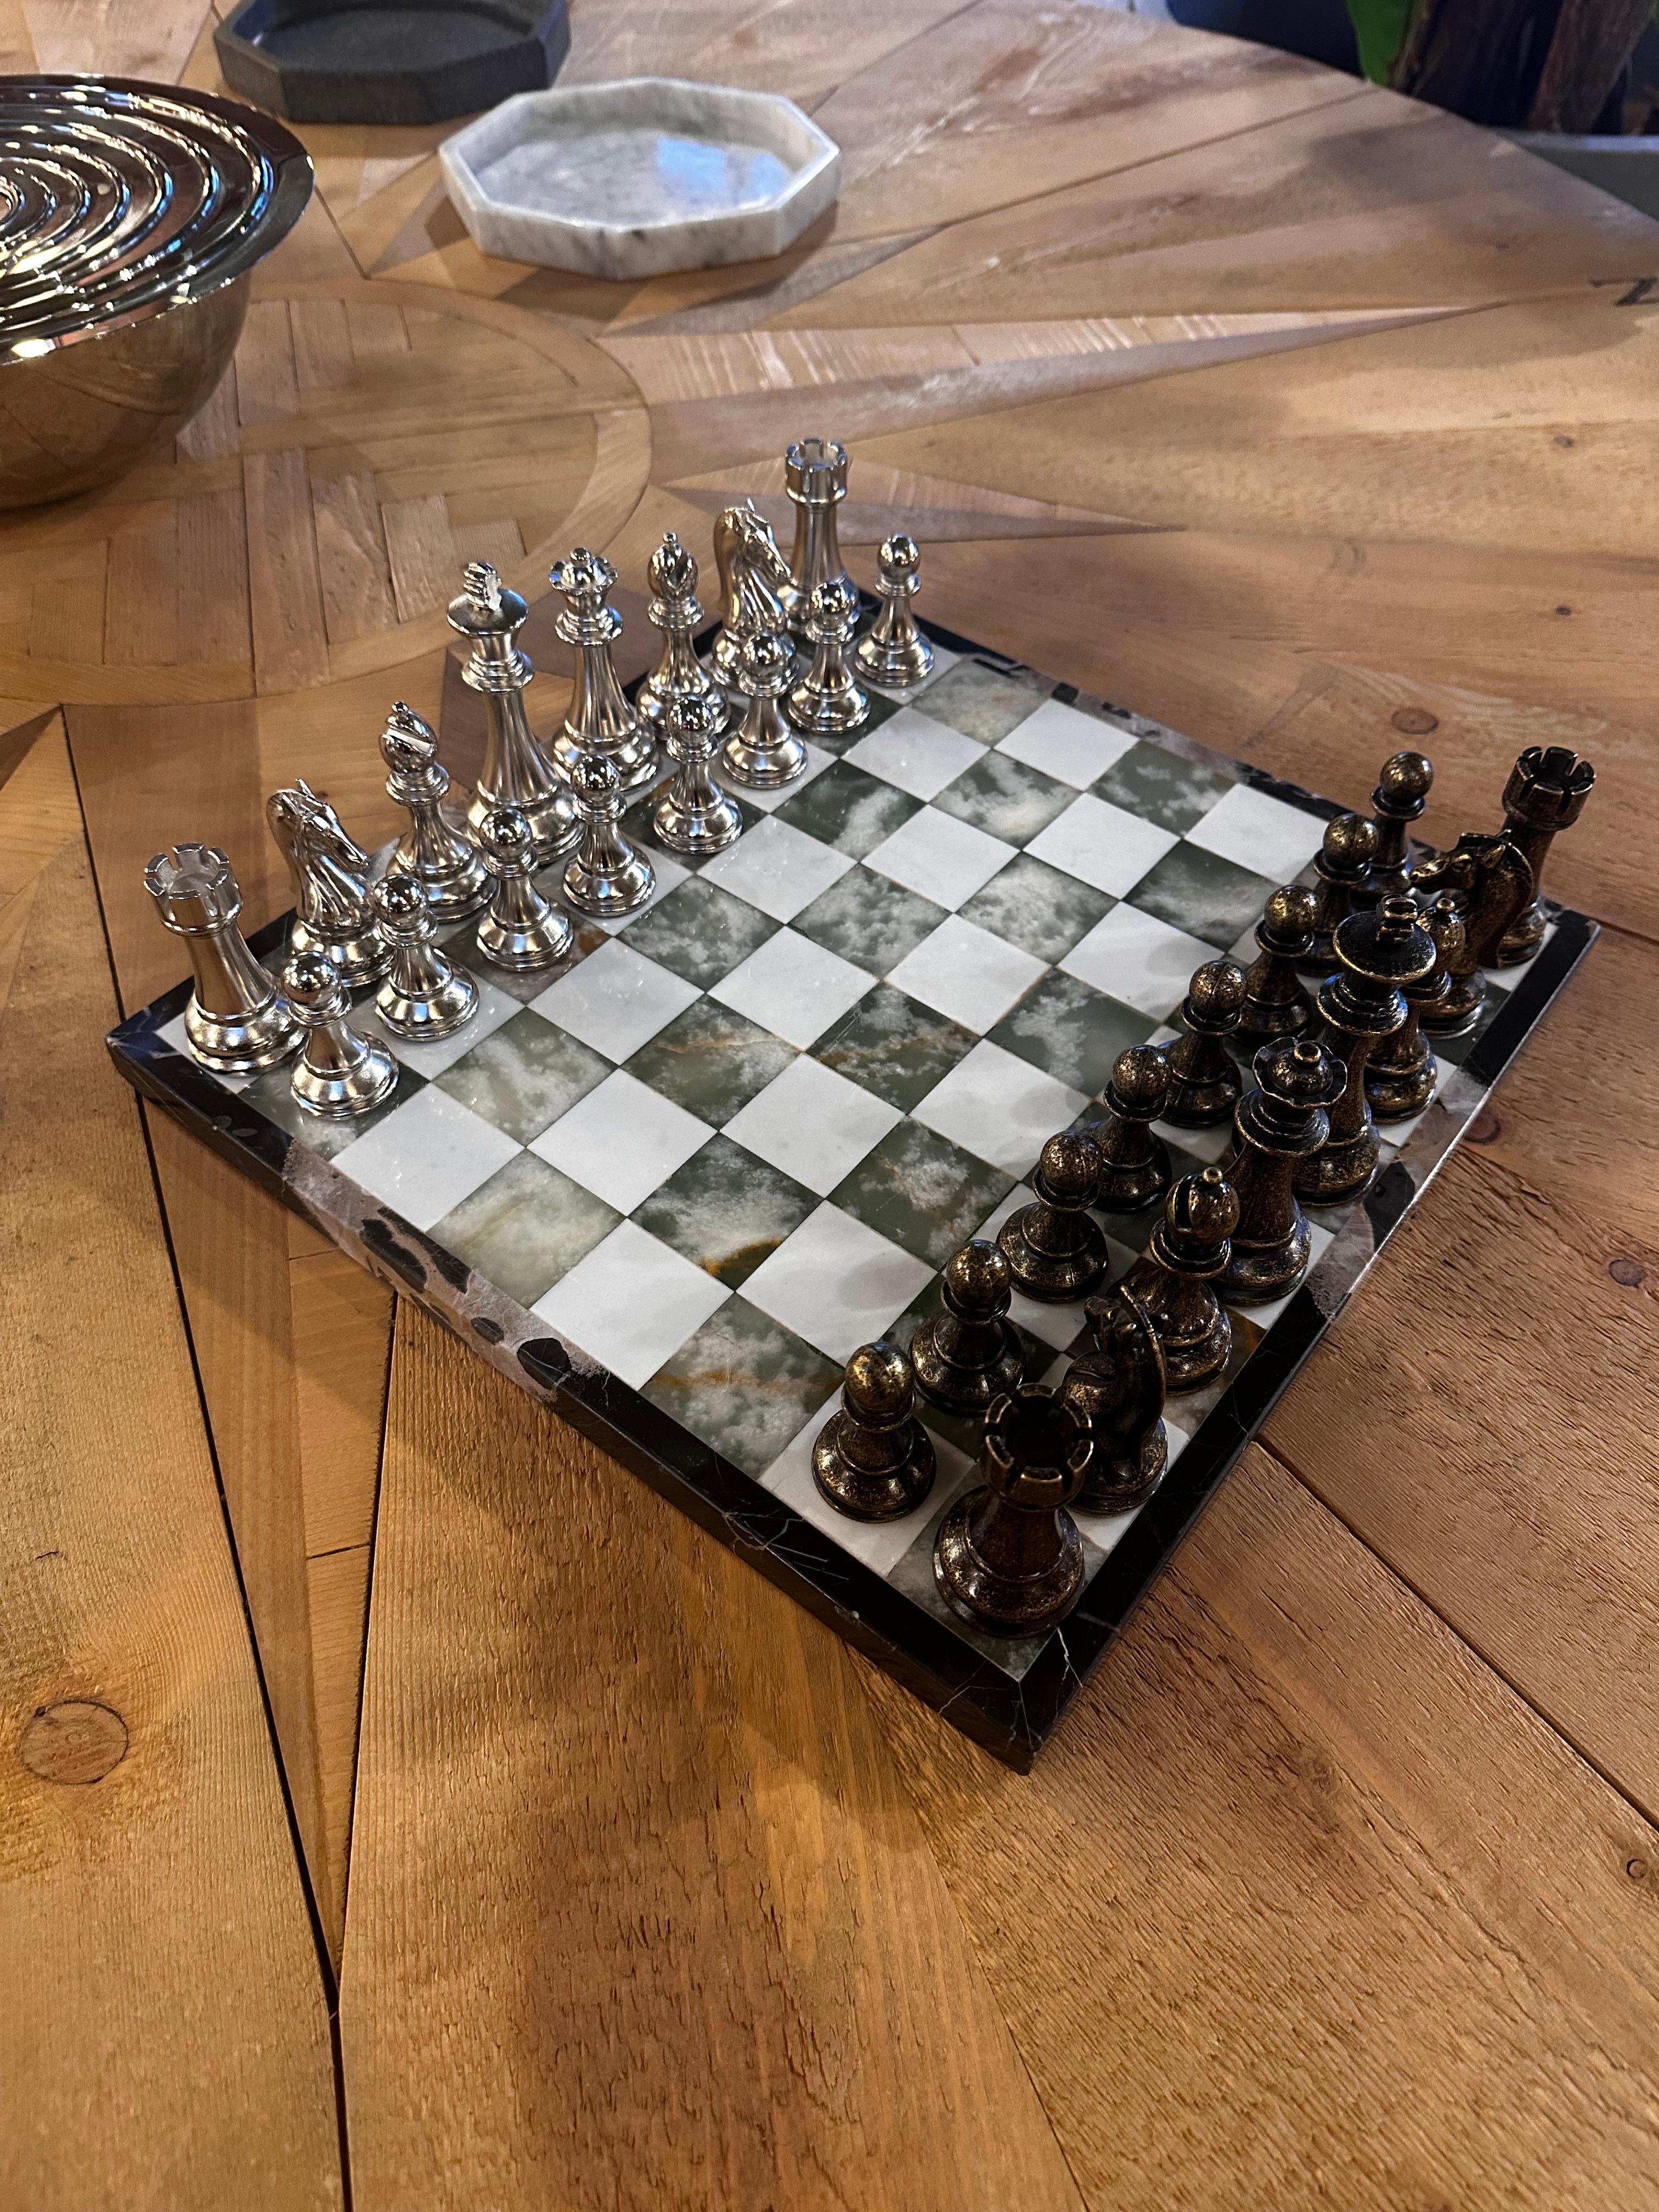 The Vintage Italian Marble Large Chess set from the 1980s is a luxurious and visually striking board game. The chessboard is crafted from exquisite Italian marble, lending it a timeless elegance. Paired with metal chess pieces, this set combines